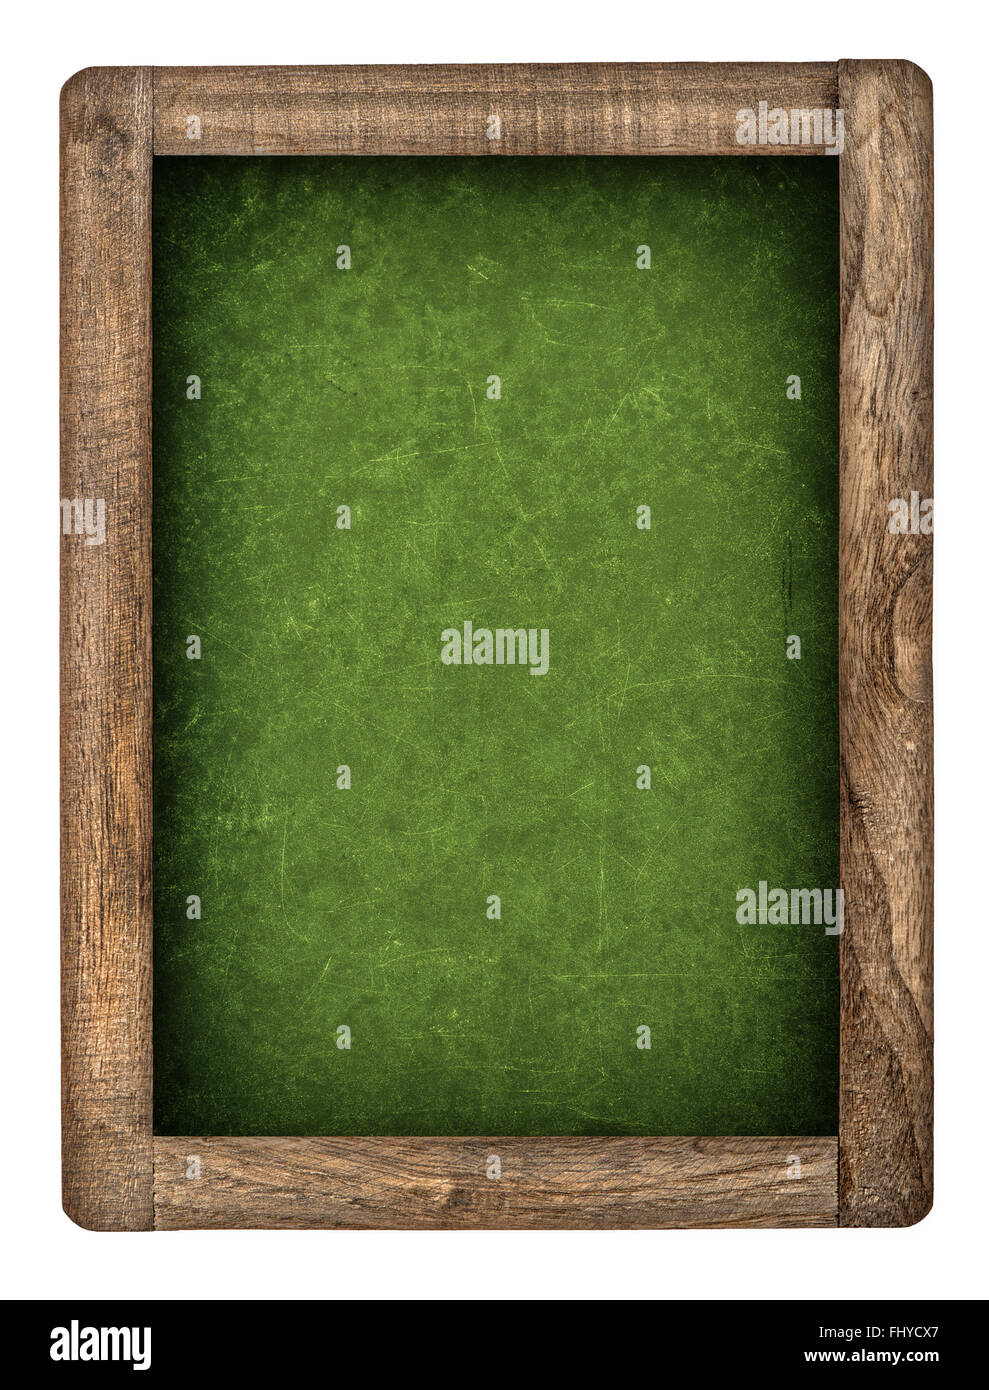 Vintage green chalkboard with wooden frame isolated on white background Stock Photo